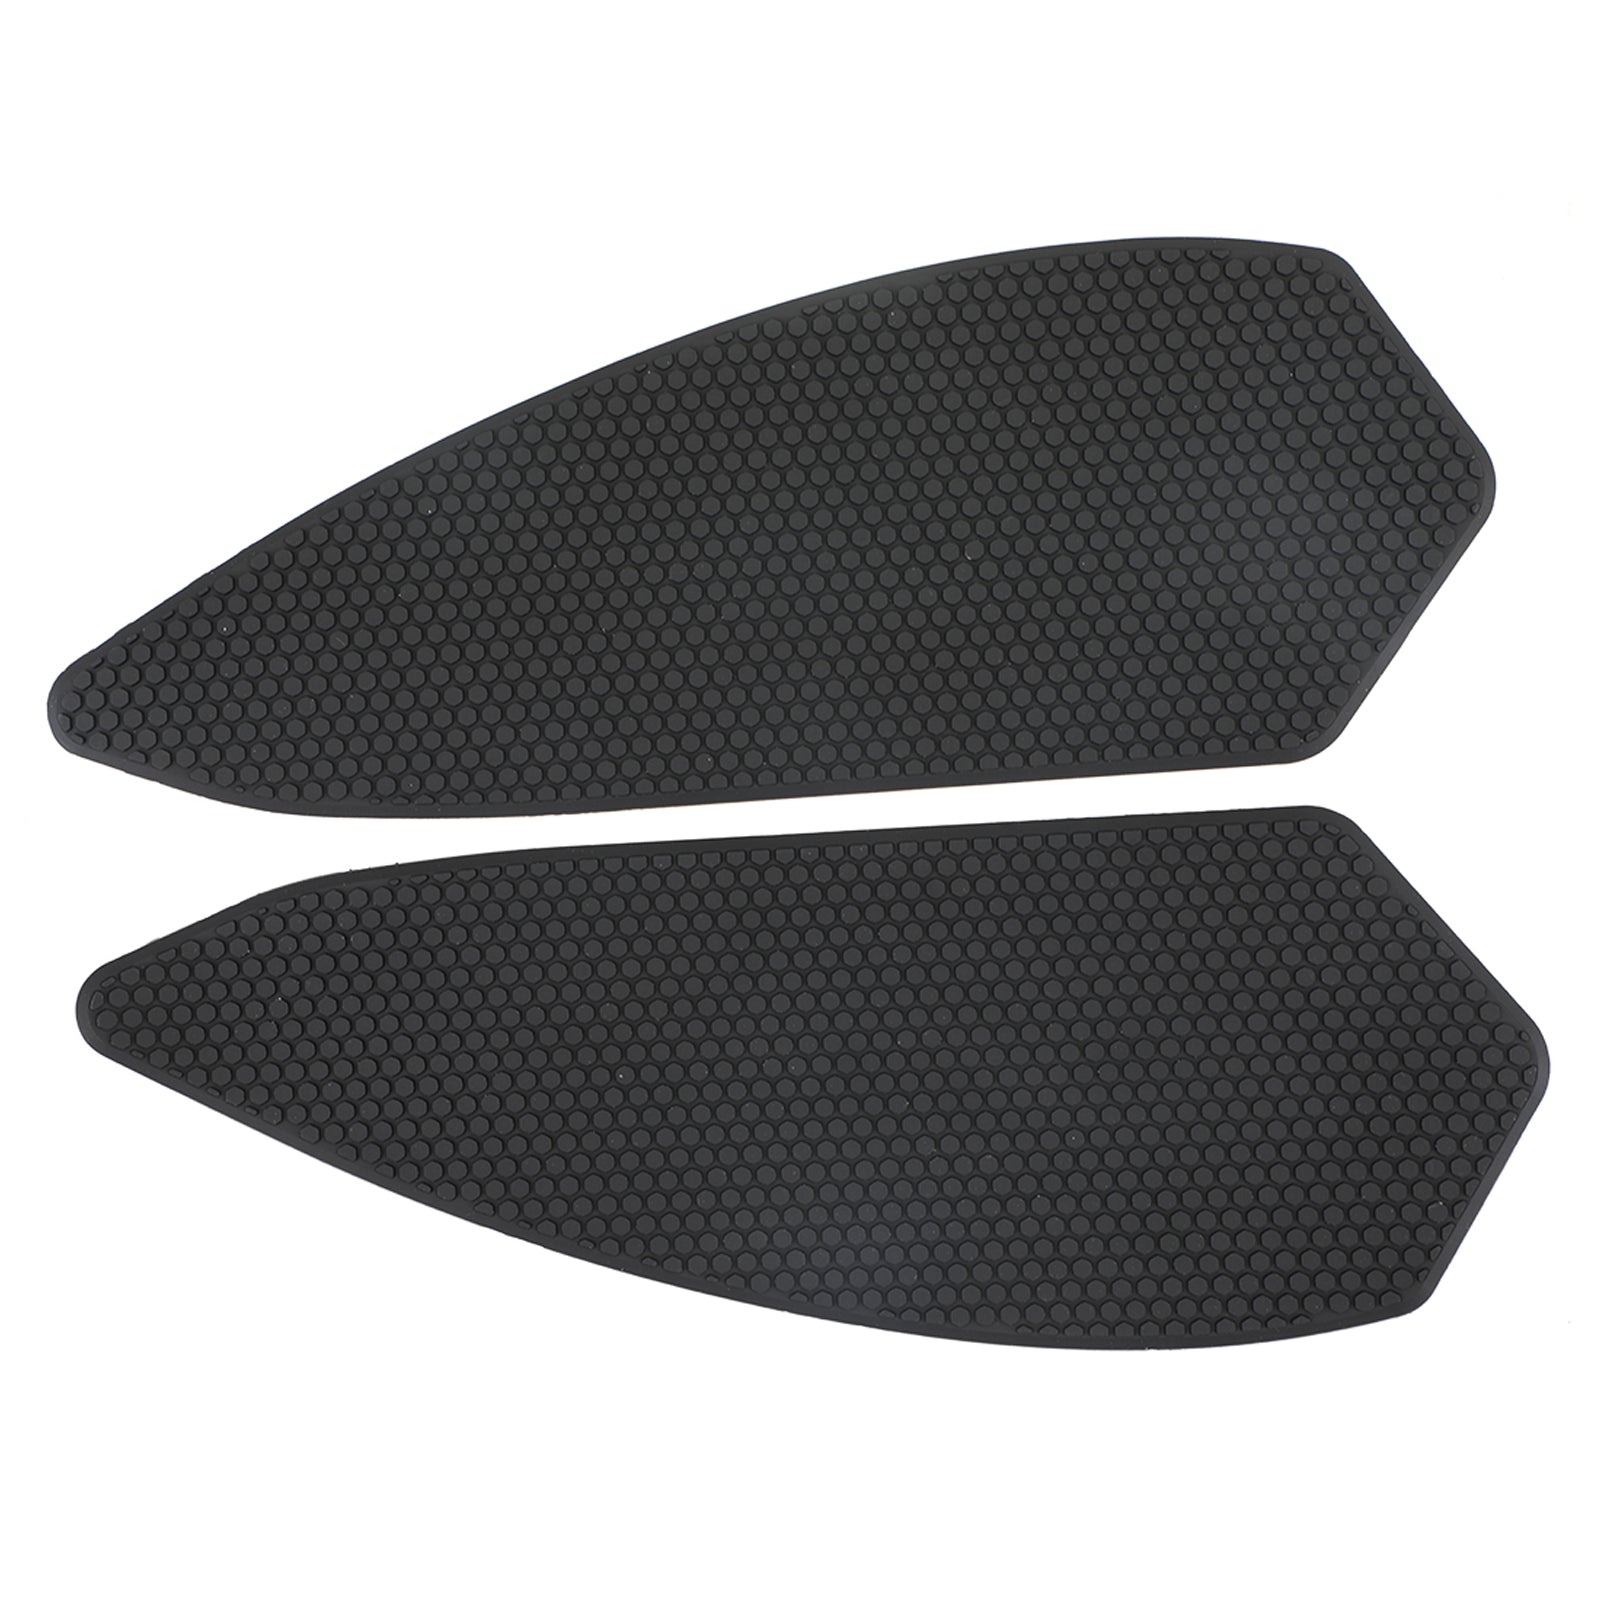 Tank Traction Grips Boot Guards Side Pads for BMW S 1000 RR S1000RR 2020 + Generic